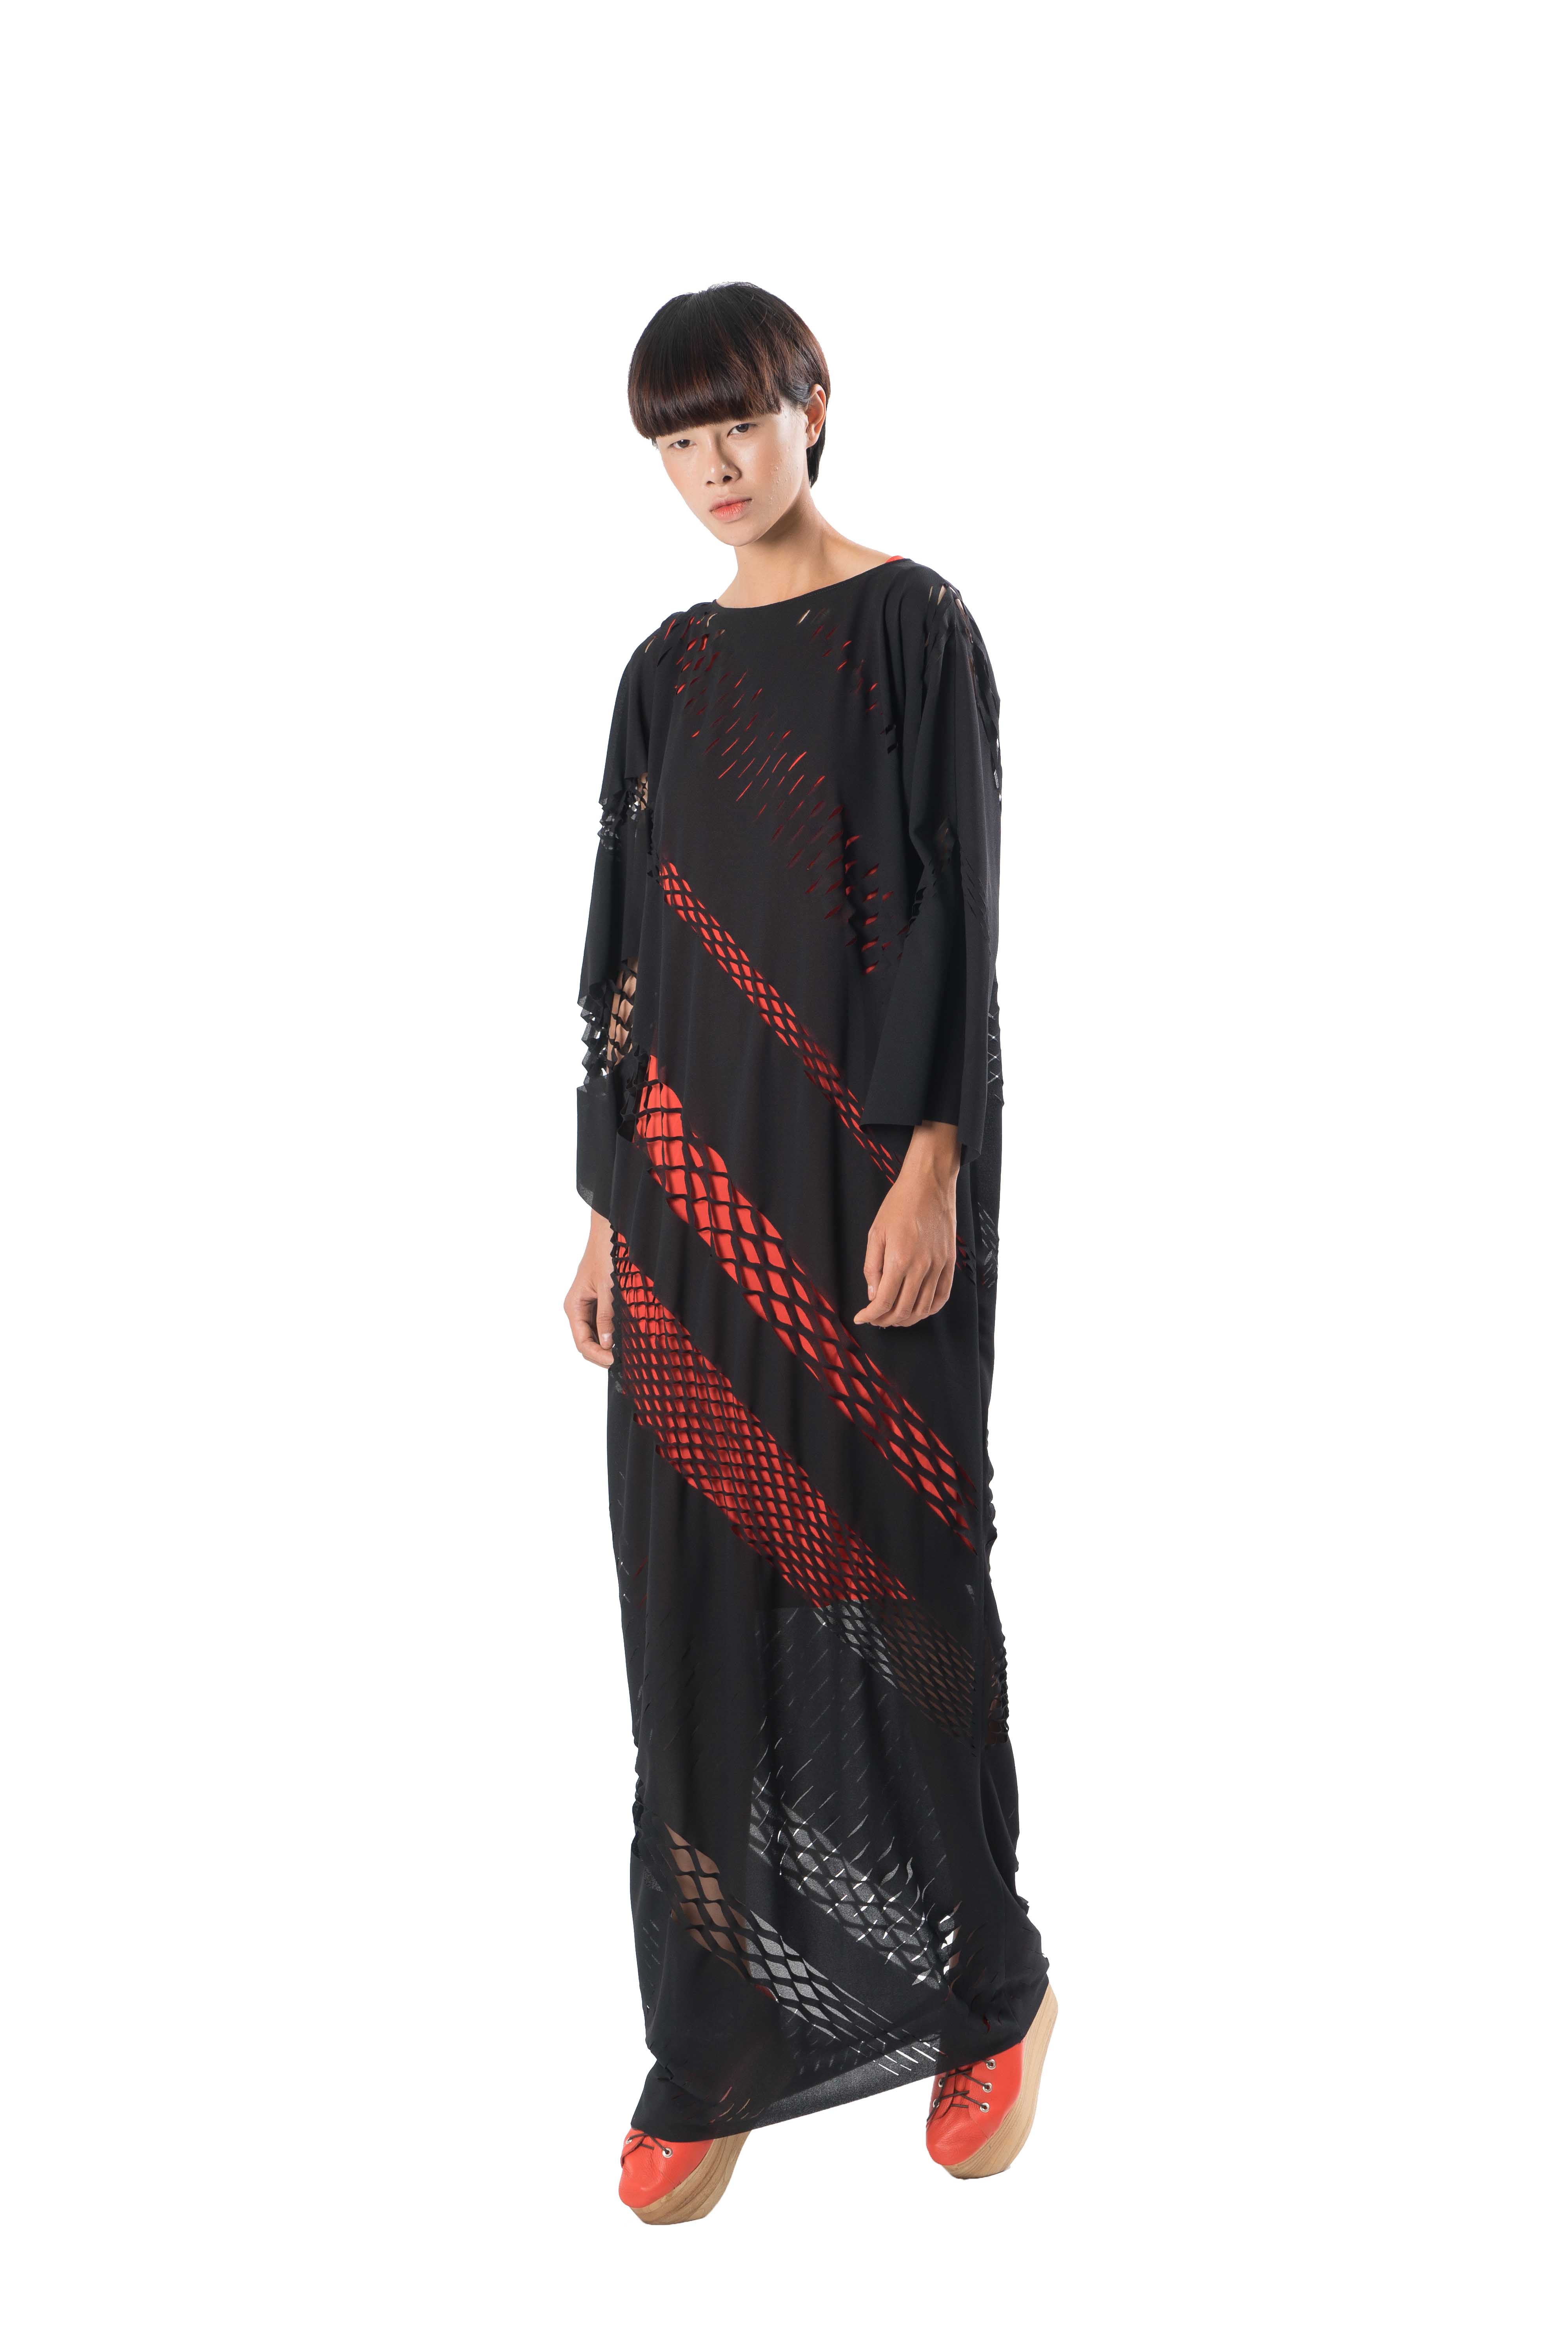 Long black dress with kimono style sleeves with laser cut out detailing